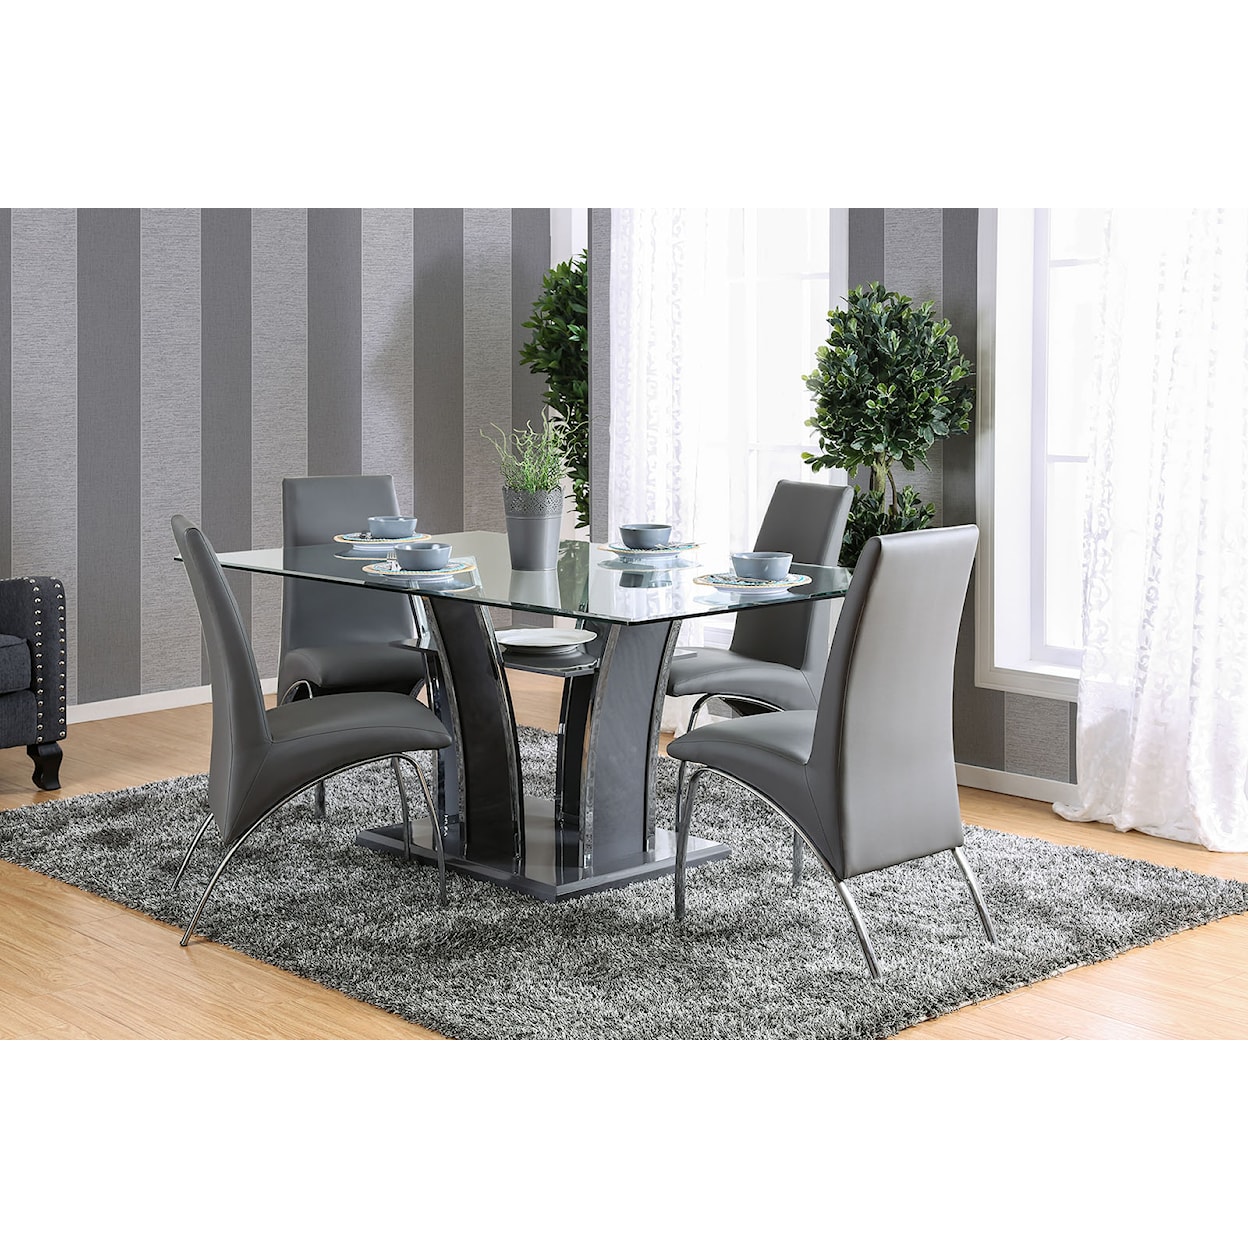 Furniture of America Glenview Dining Table 